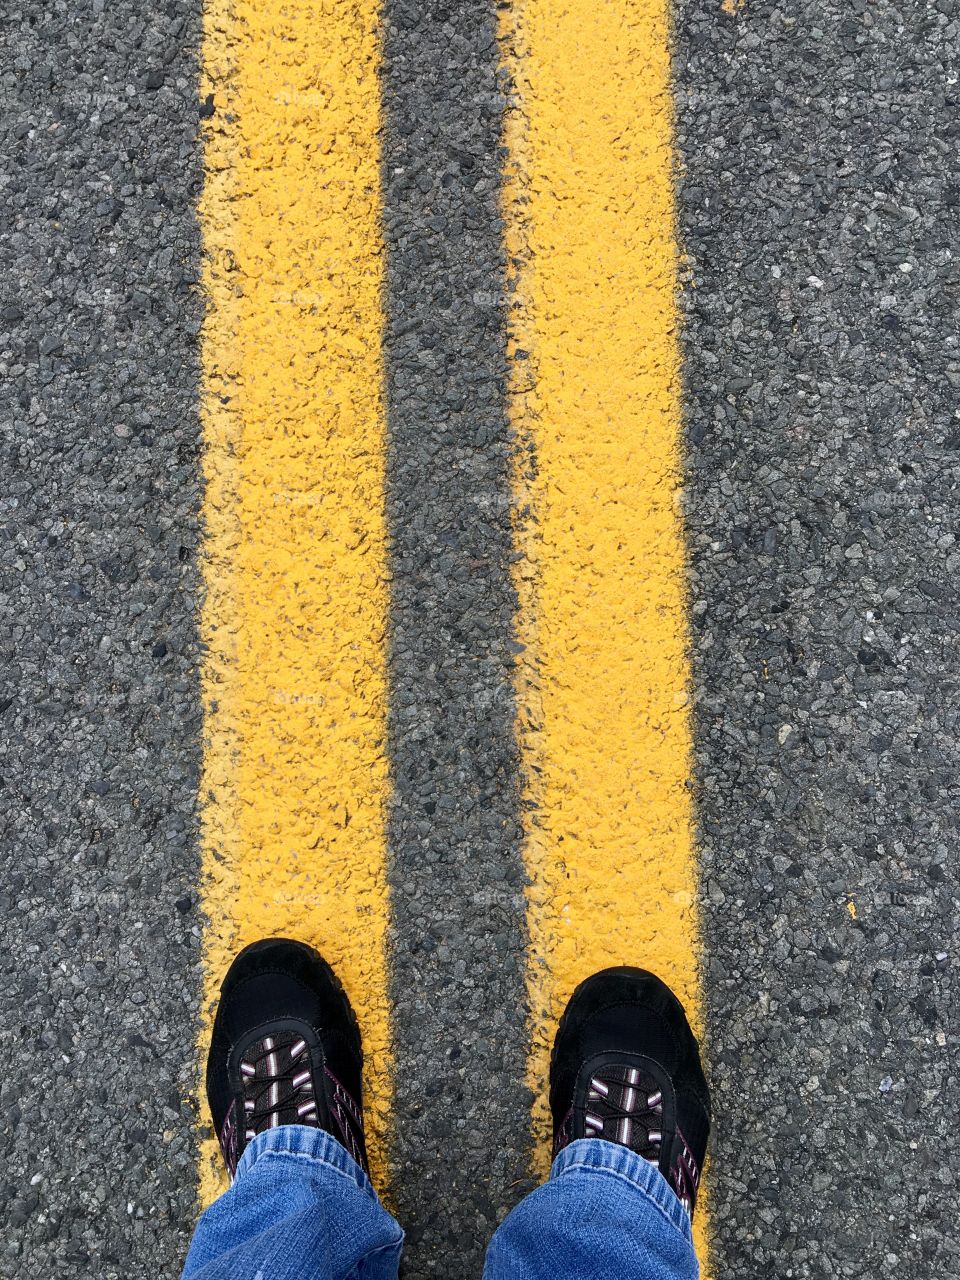 My Feet On The Double No Passing Line

I'm standing on the highway with no traffic coming, luckily. 
The lines mean NO PASSING!